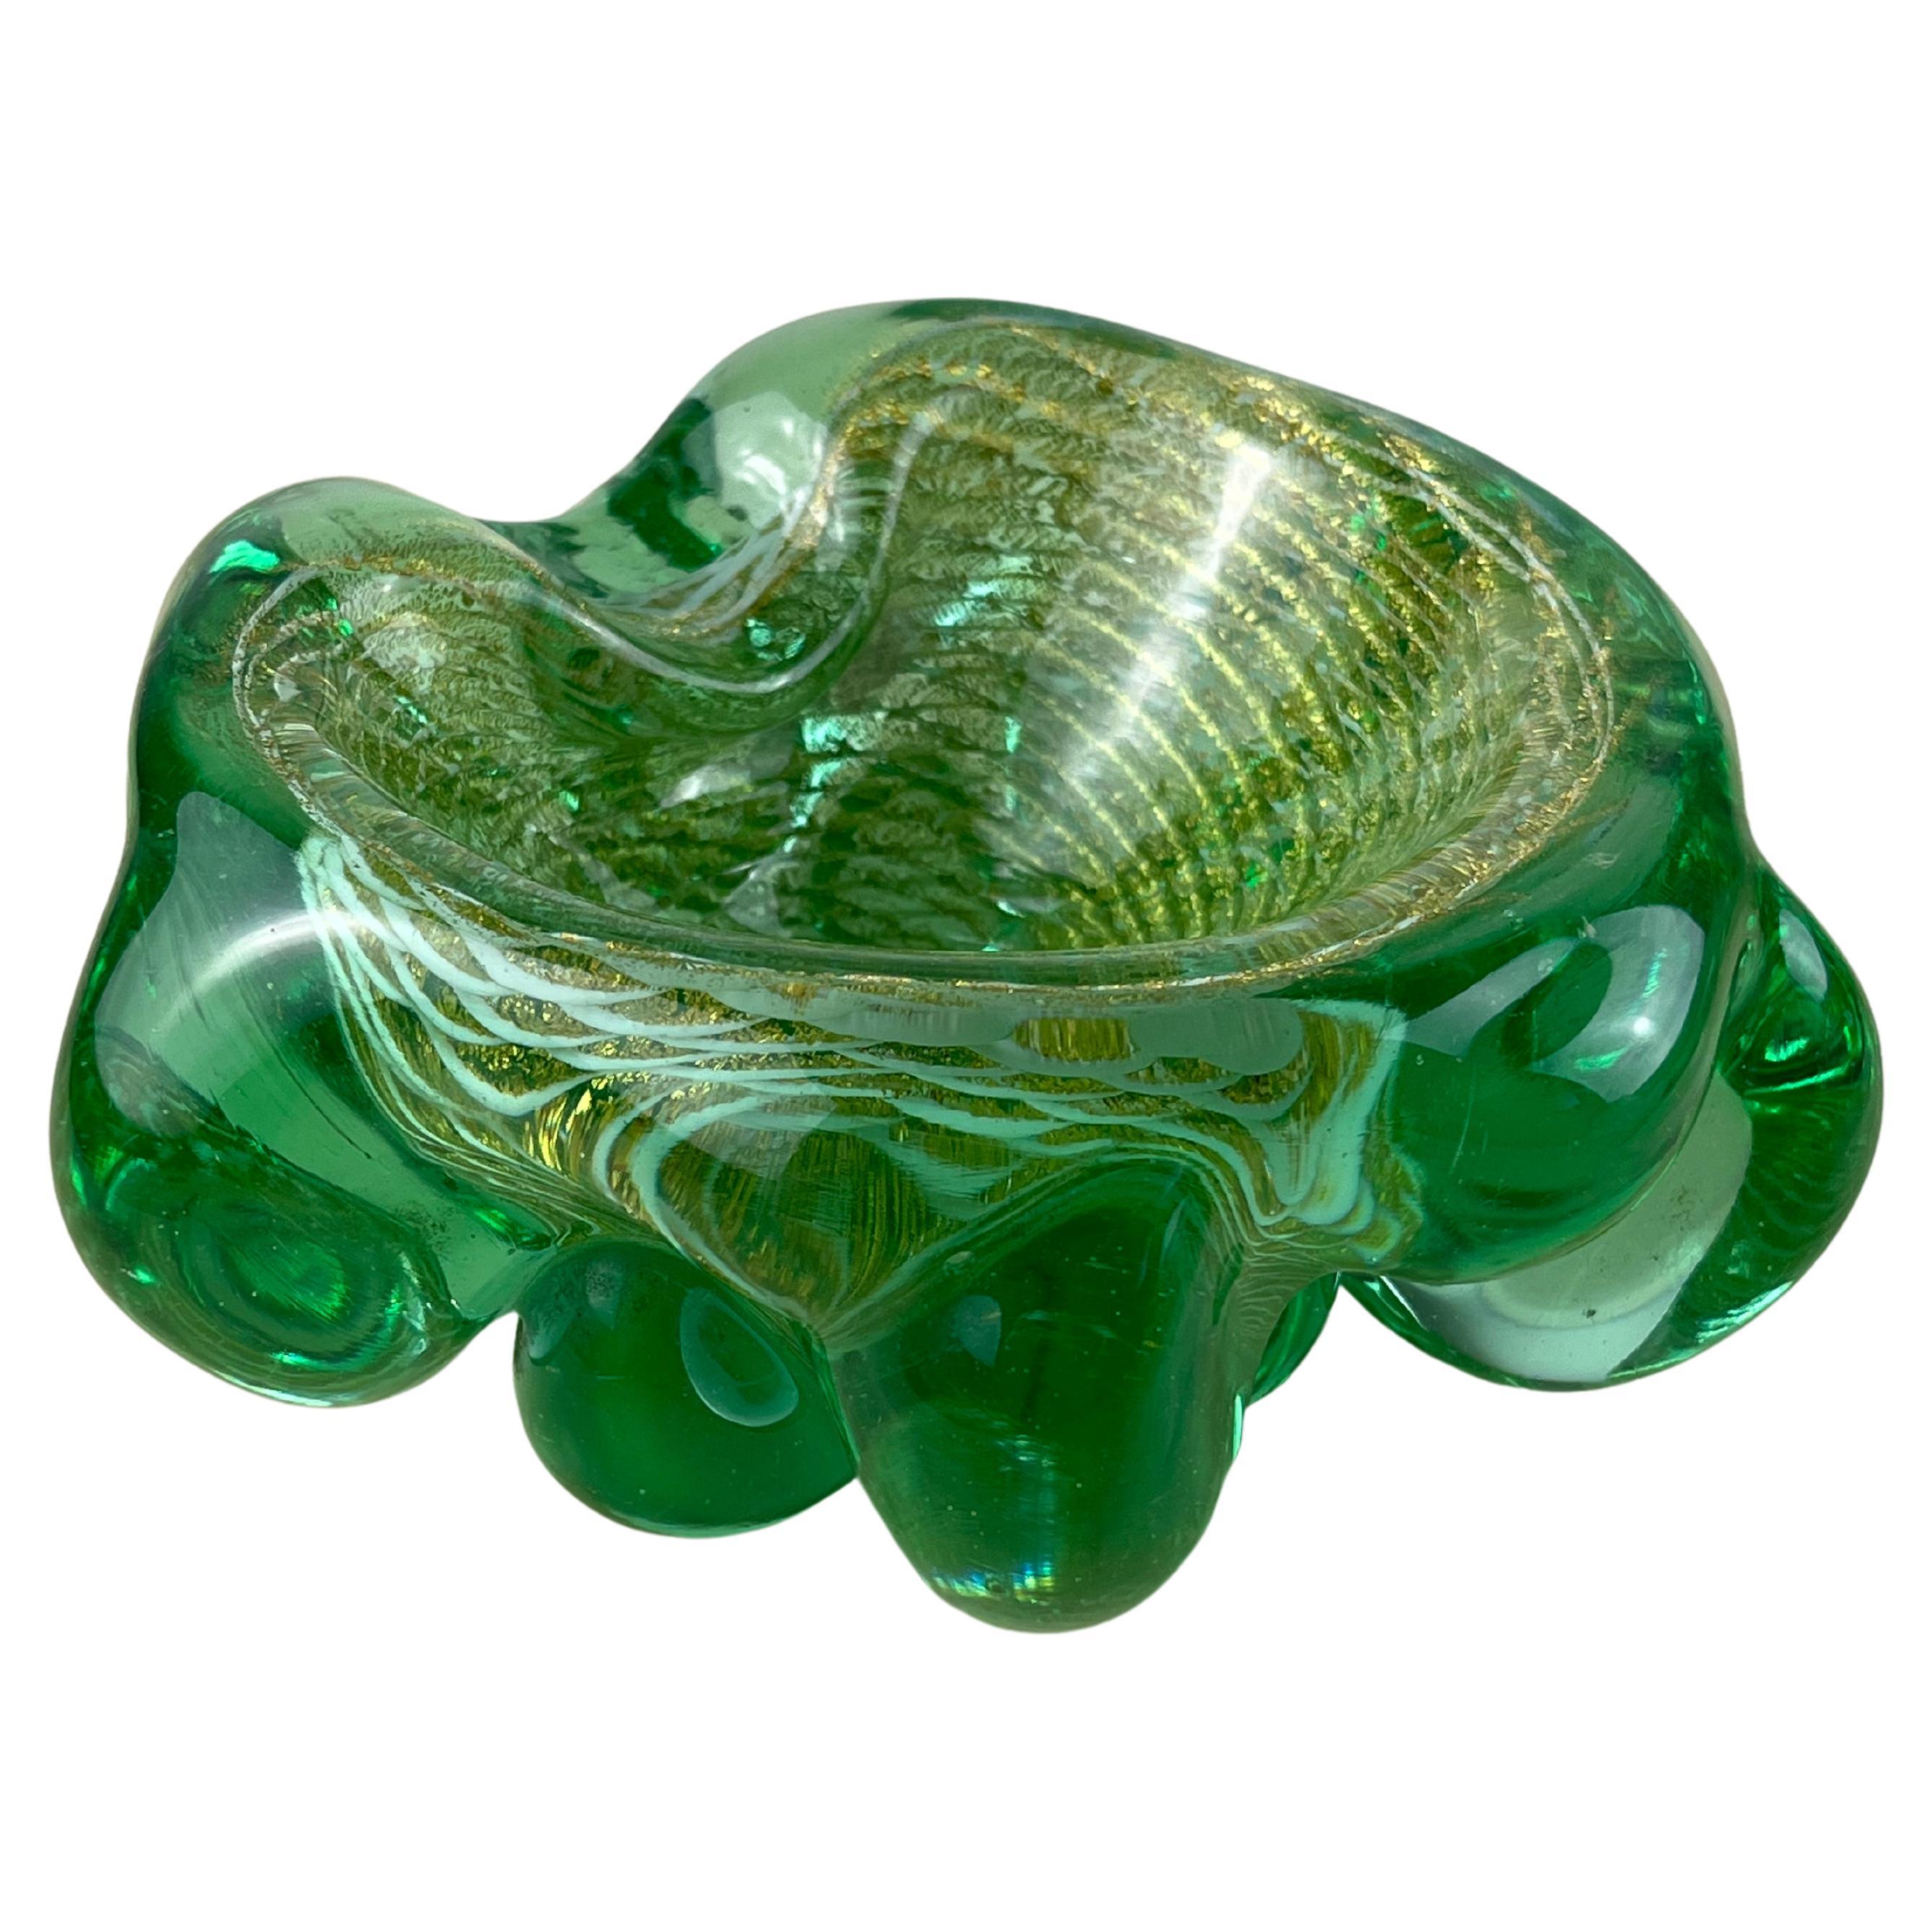 Submerged Murano Glass Ashtray, attributed to Barovier & Toso, Italy, 1970s